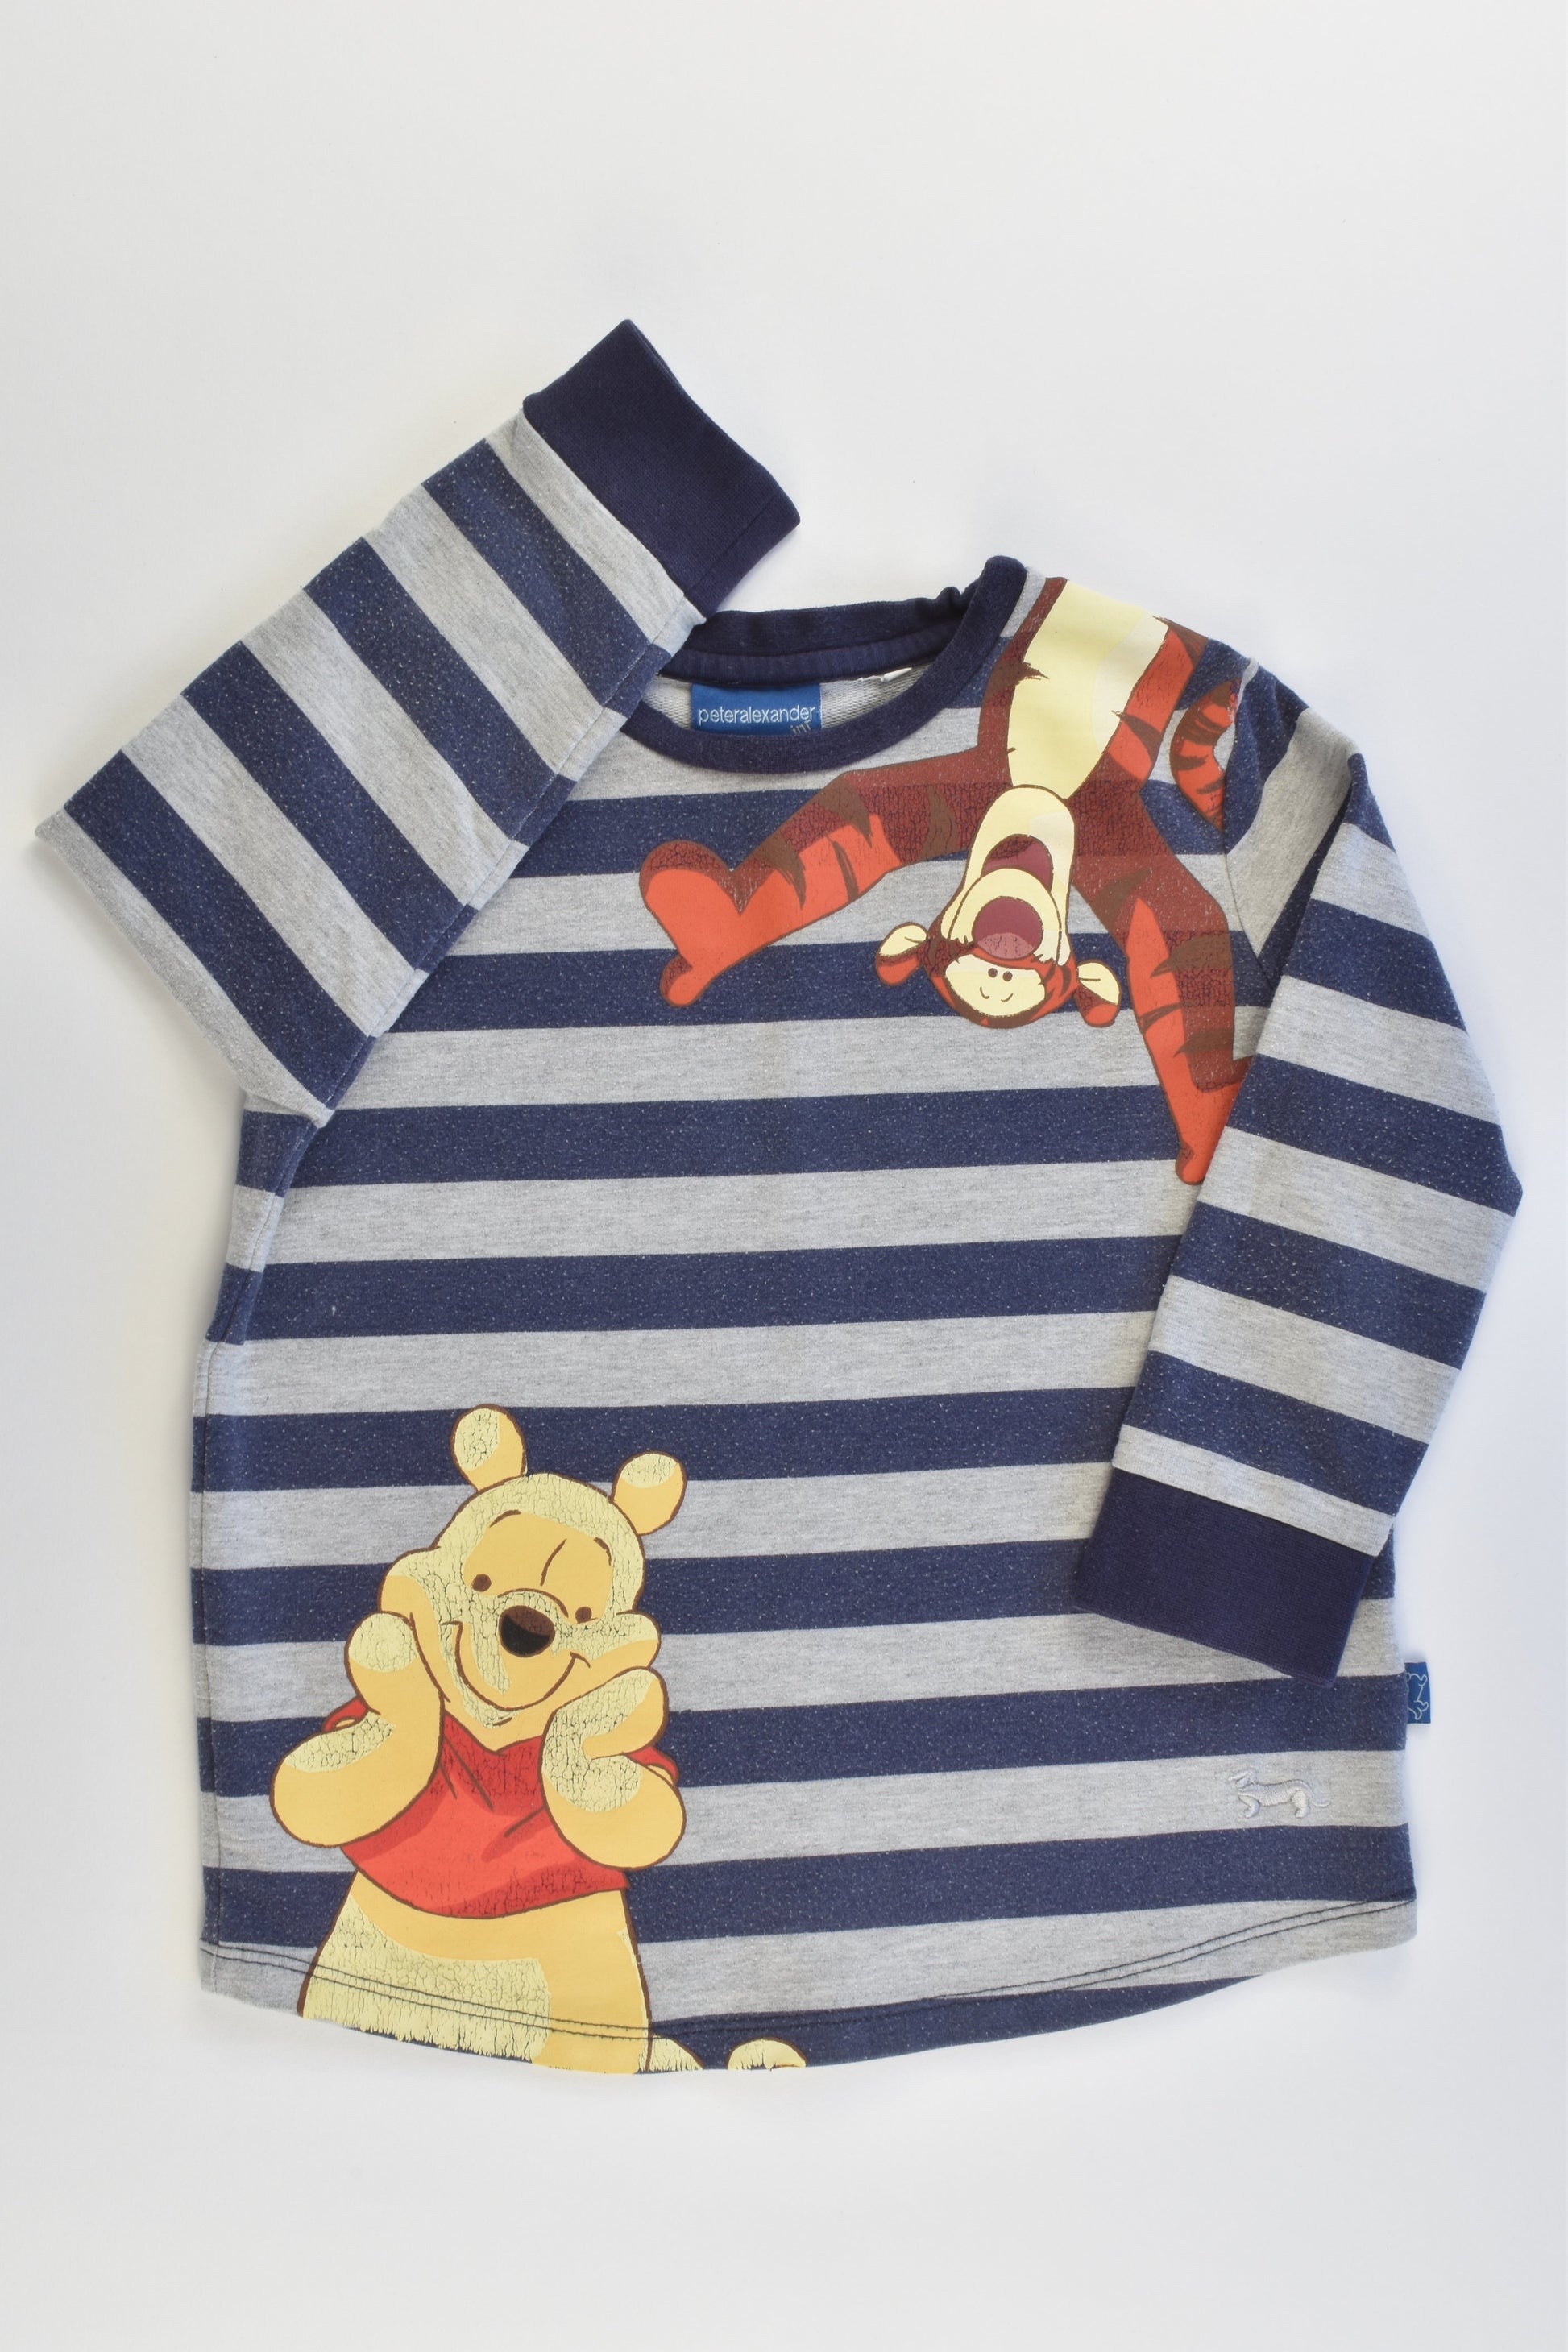 Peter Alexander Size 2 Winnie The Pooh and Tigger Sweater